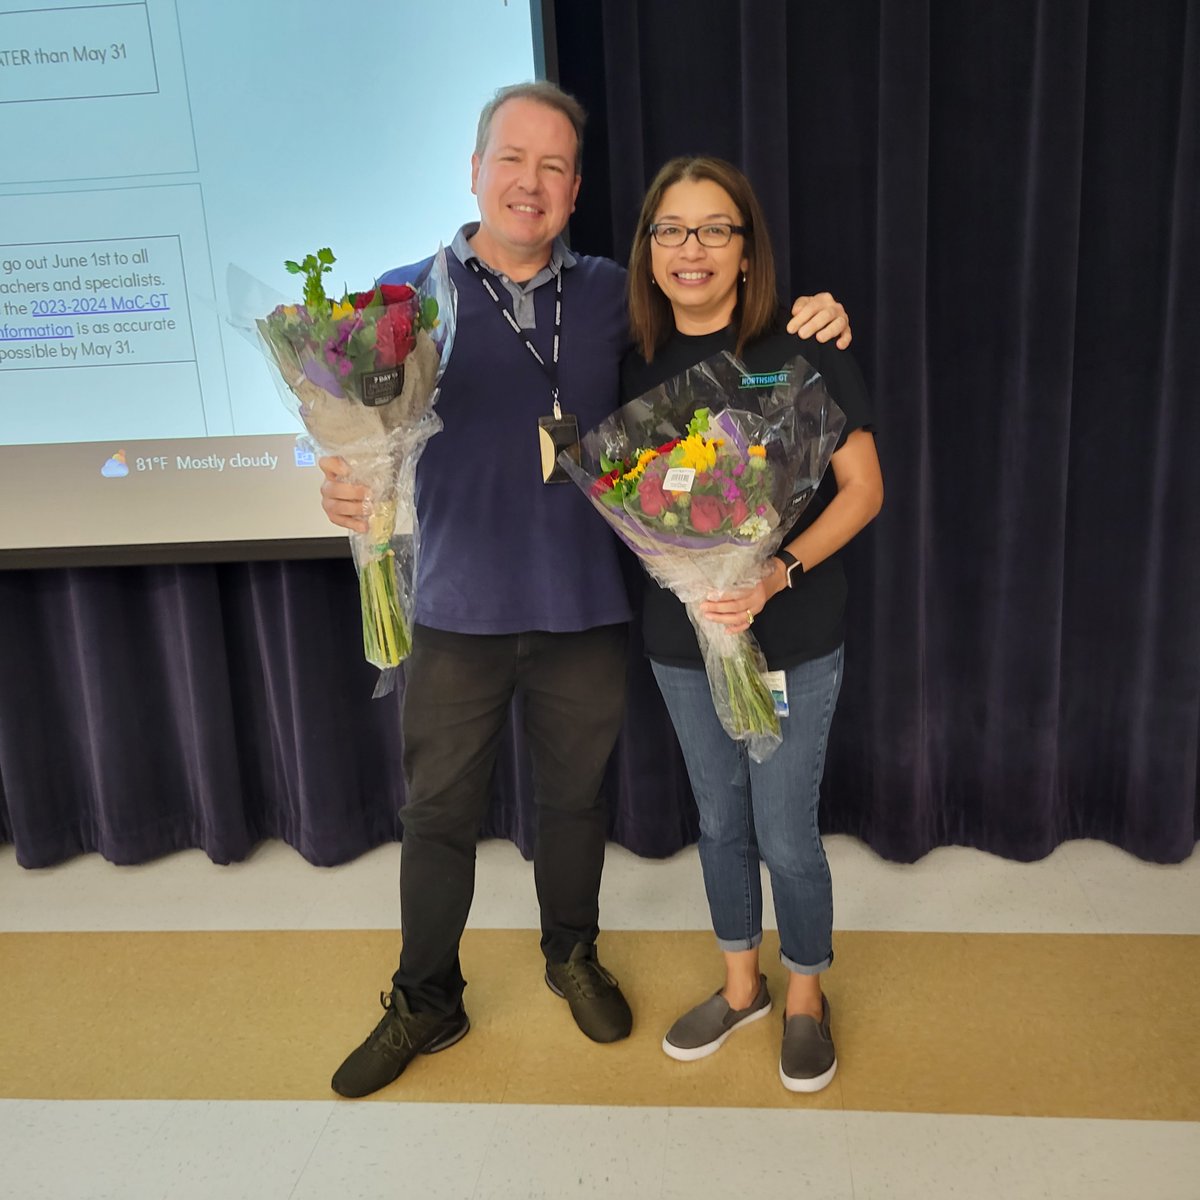 Congratulations to our two retiring GT Specialists! We will miss you Mr. David Debus @DDebus53 and Ms. Sylvia Carrizales @sylviacarrizal9! As will your schools, @NISDAllenES and @NISDMyers respectfully. Good Luck and Happy Trails to you both! #WhyGT #NorthsideGT